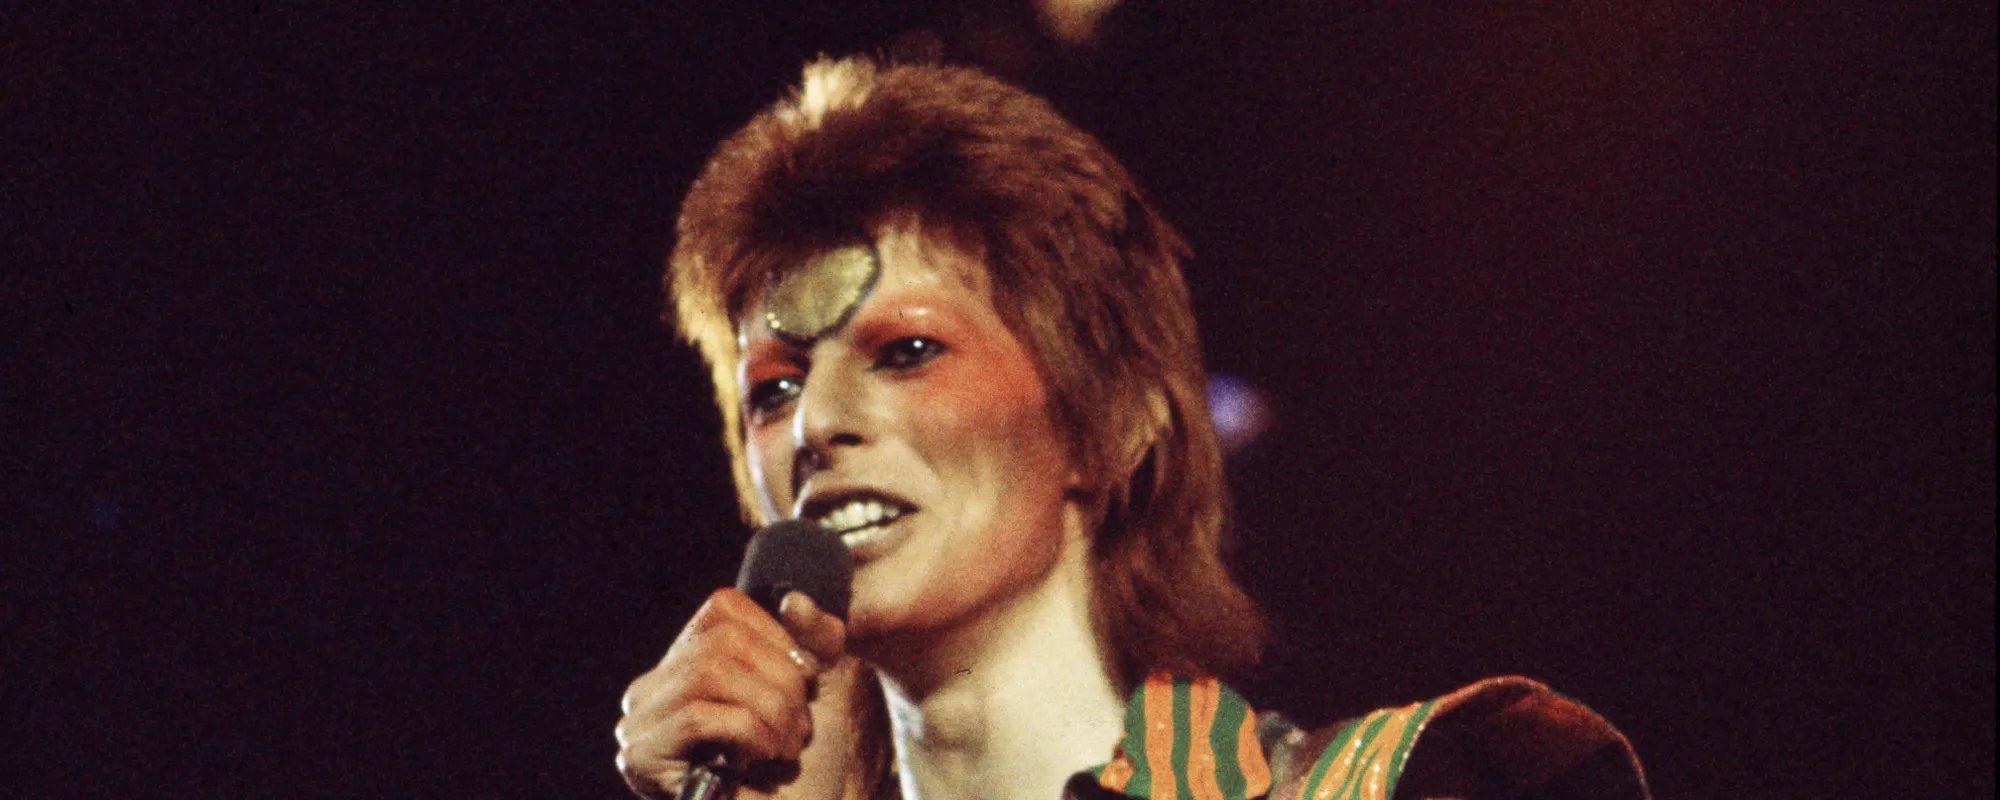 Members of Pearl Jam, R.E.M., Death Cab, Sleater-Kinney, and More Set for David Bowie Tribute